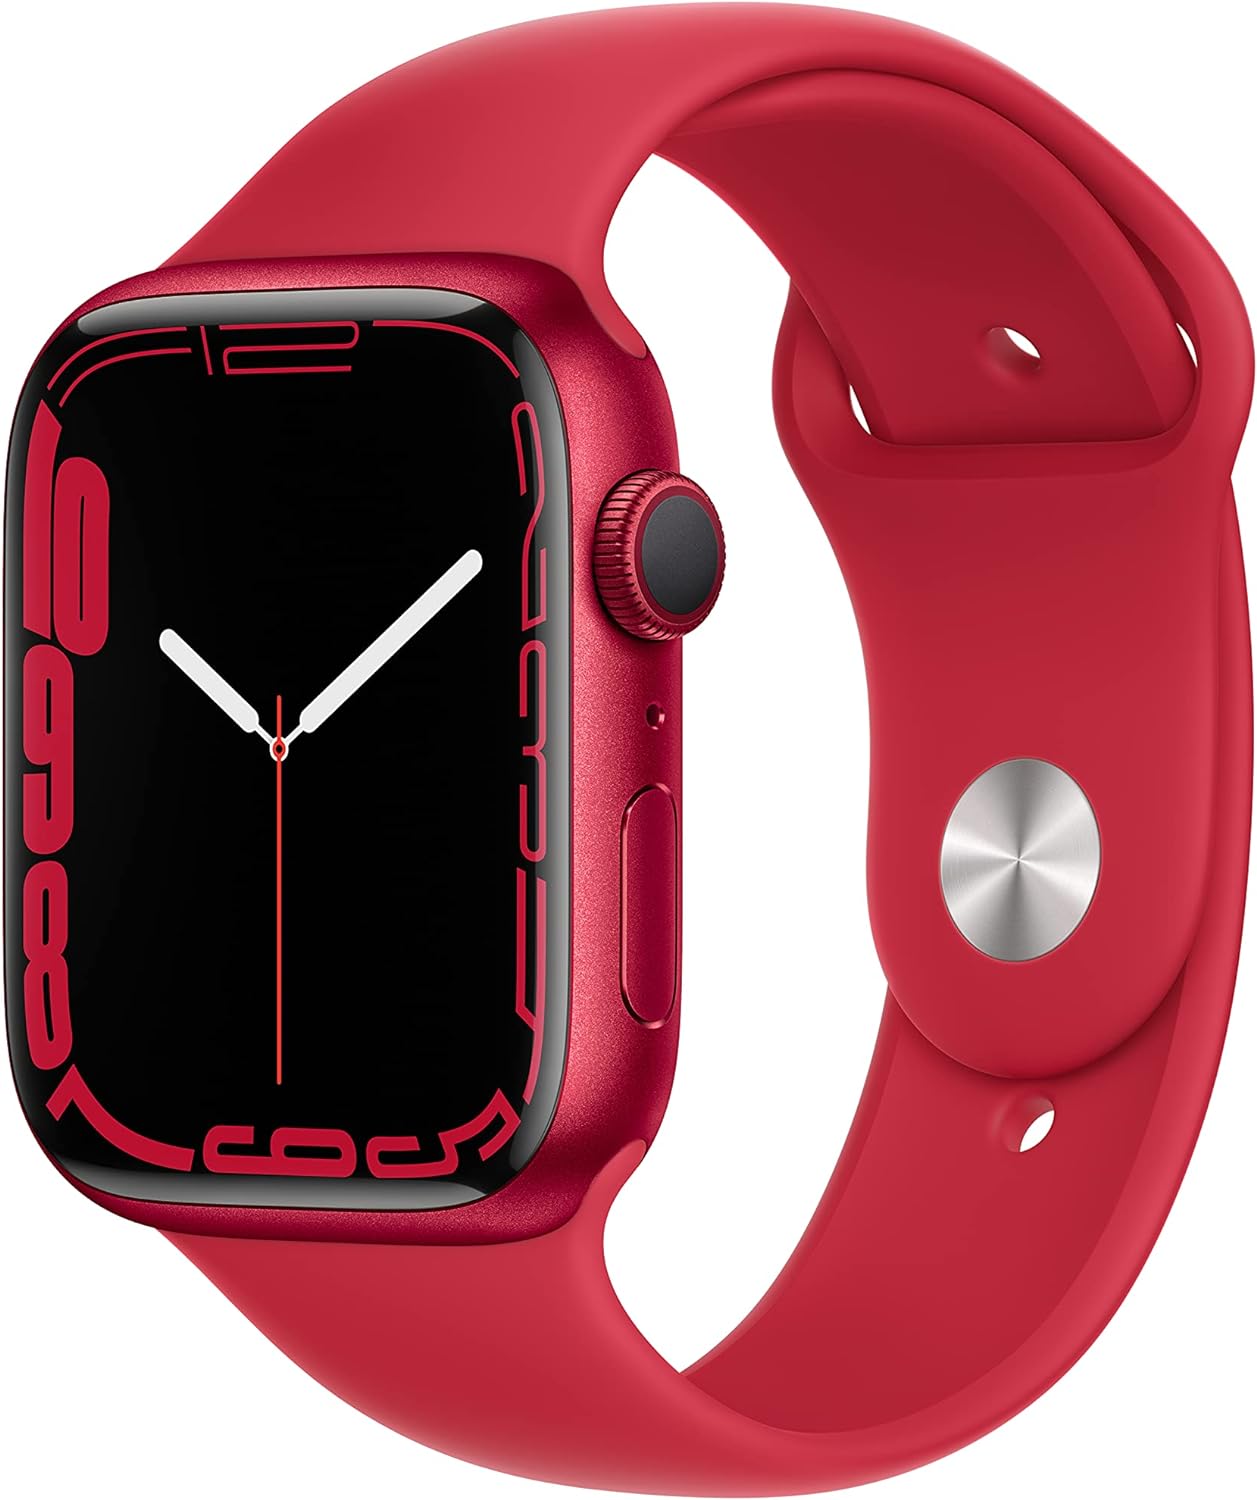 Apple Watch Series 7 [GPS 45mm] Smart Watch w/ (Product) RED Aluminum Case with (Product) RED Sport Band: Detailed Review & Recommendations on Fitness Tracker, Blood Oxygen & ECG Apps, Always-On Retina Display, and Water Resistance